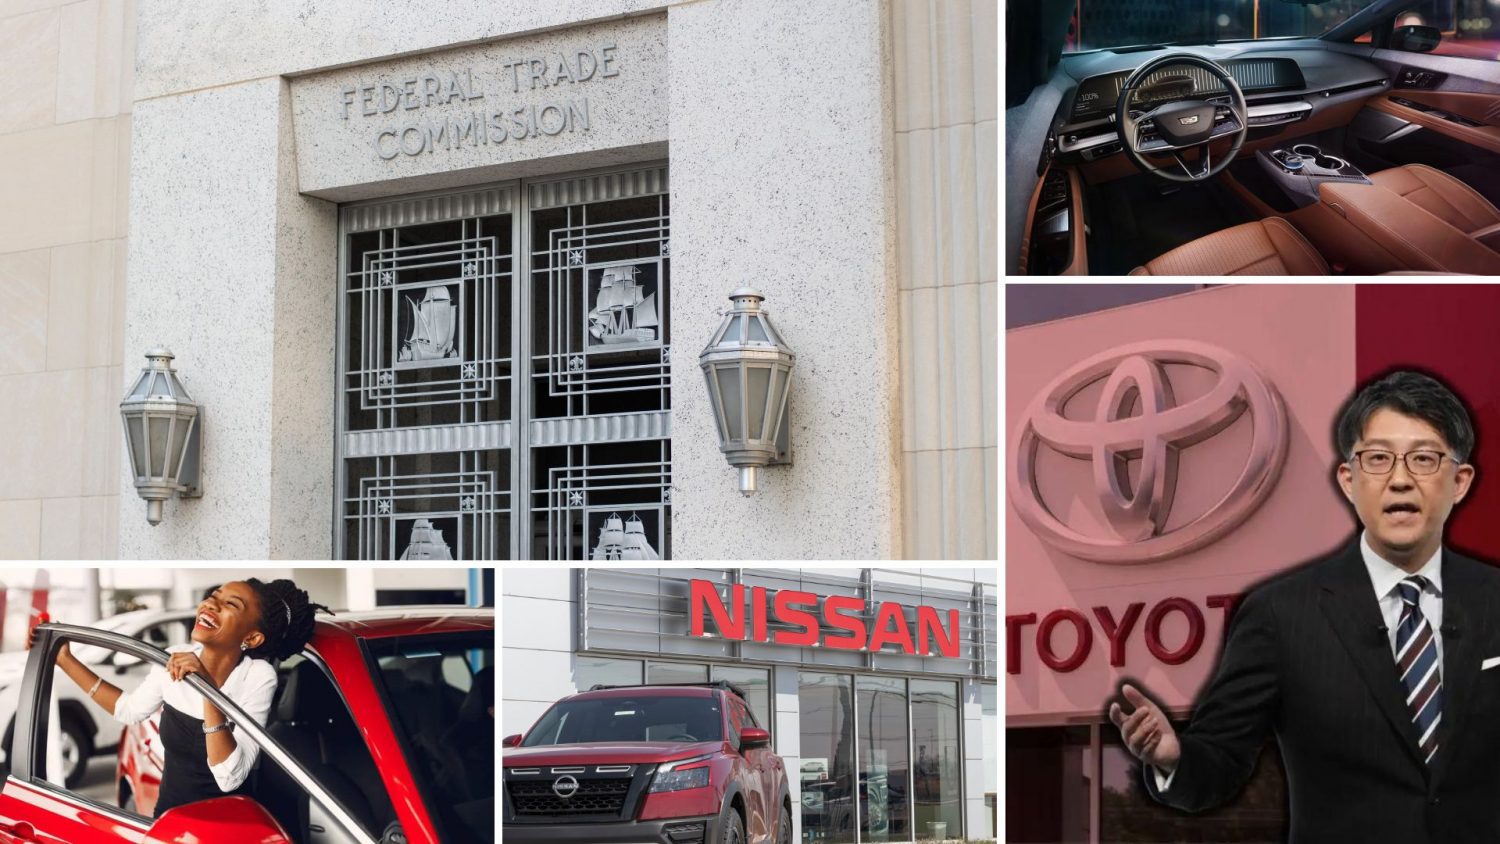 Here's a closer look at the top dealership stories and more headlines to stay on top of this week's automotive industry news.